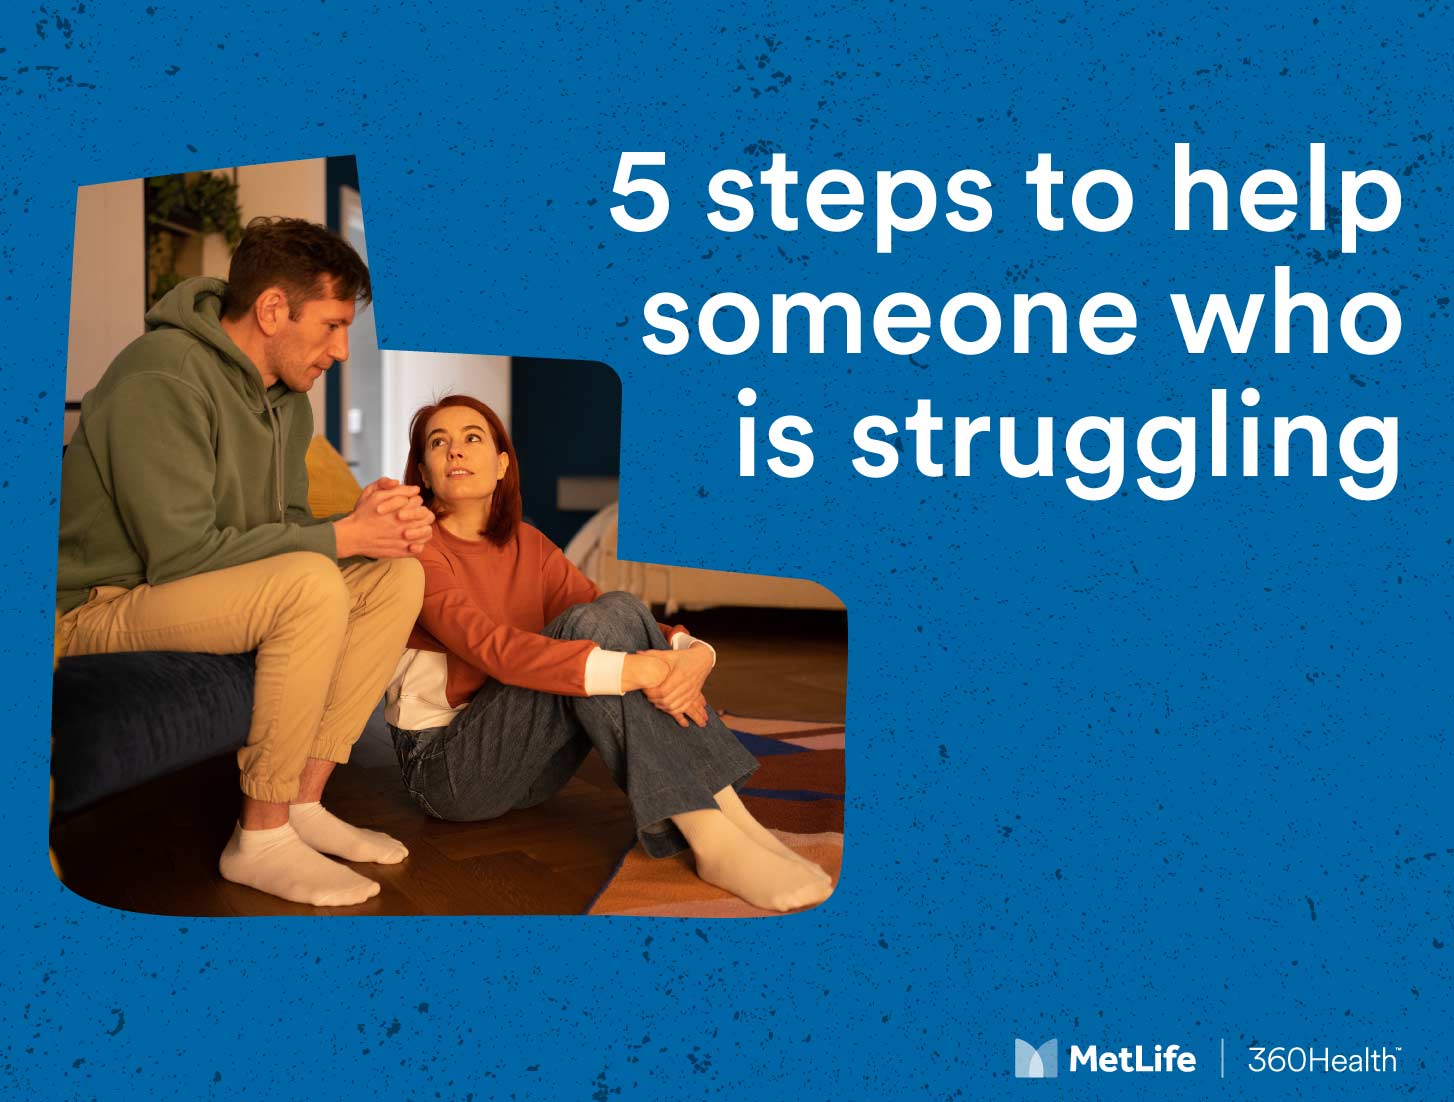 5 steps to help someone who is struggling